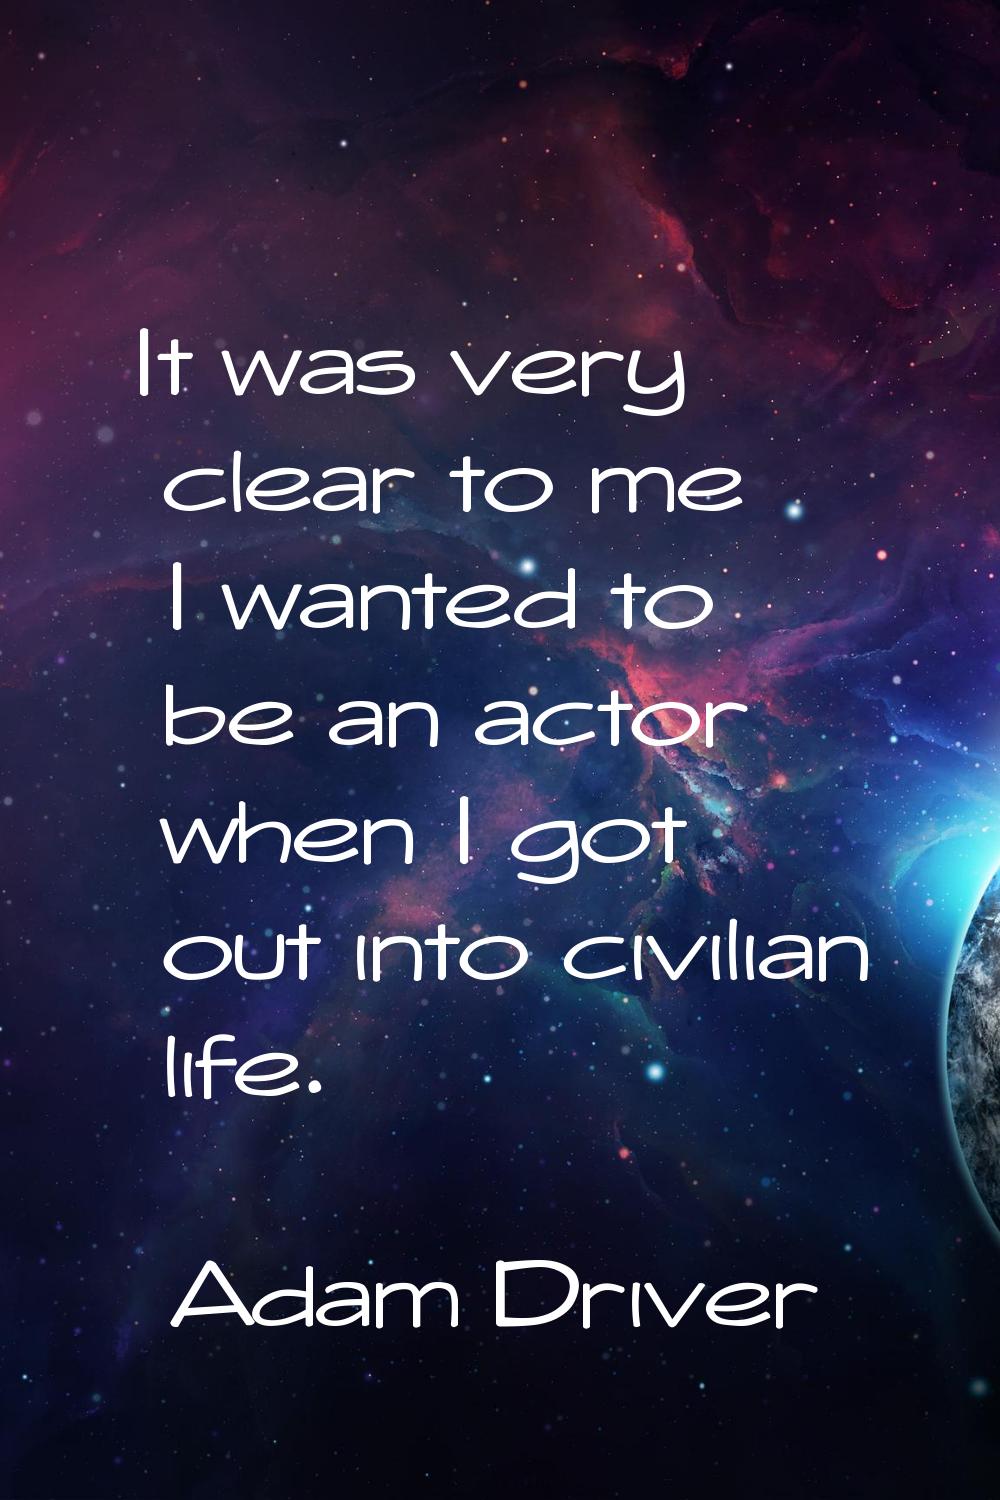 It was very clear to me I wanted to be an actor when I got out into civilian life.